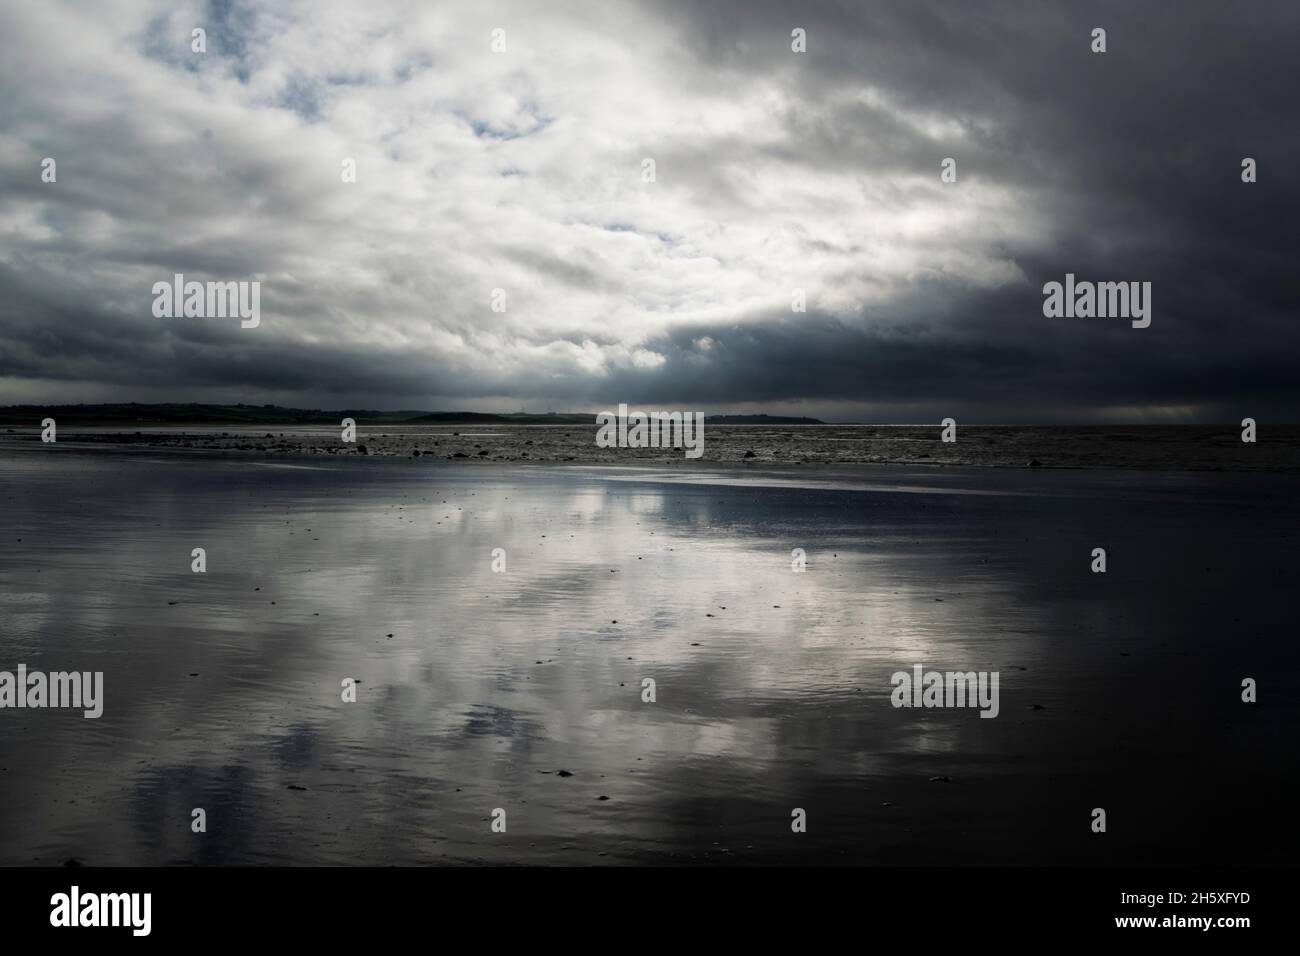 Refection of stormy clouds in the receding tidal water Stock Photo